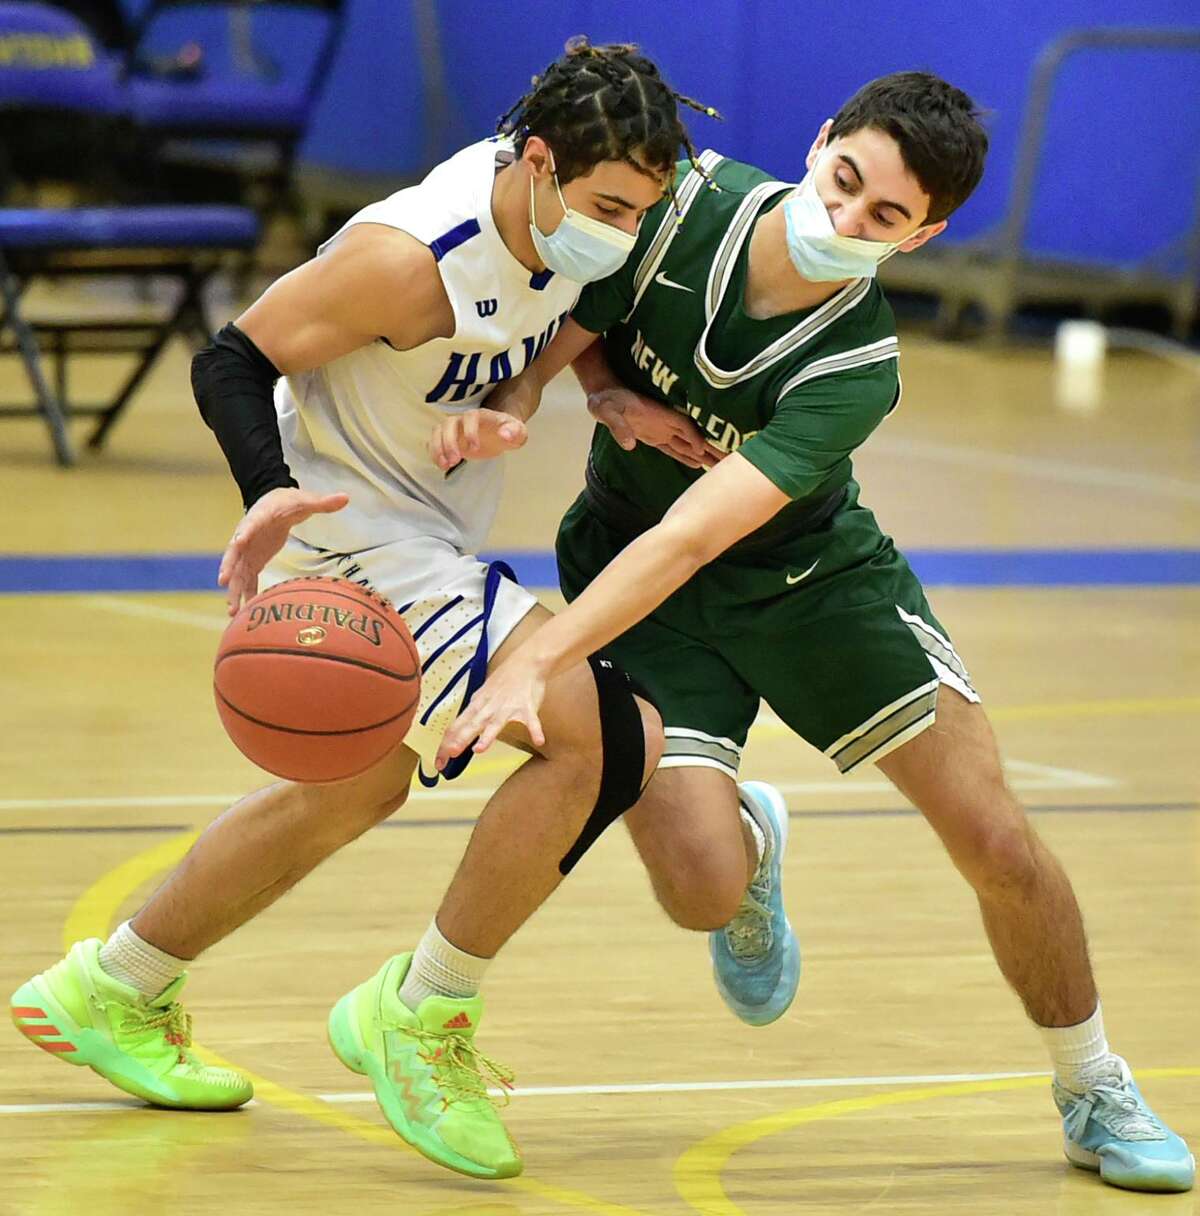 Newtown, Connecticut - Monday, March 15, 2021: Joseph McRay of Newtown left, tries to protect the ball against the defense of Stephen Sampinato of New Milford H.S. during the first quarter of basketball Monday at Newtown High School.